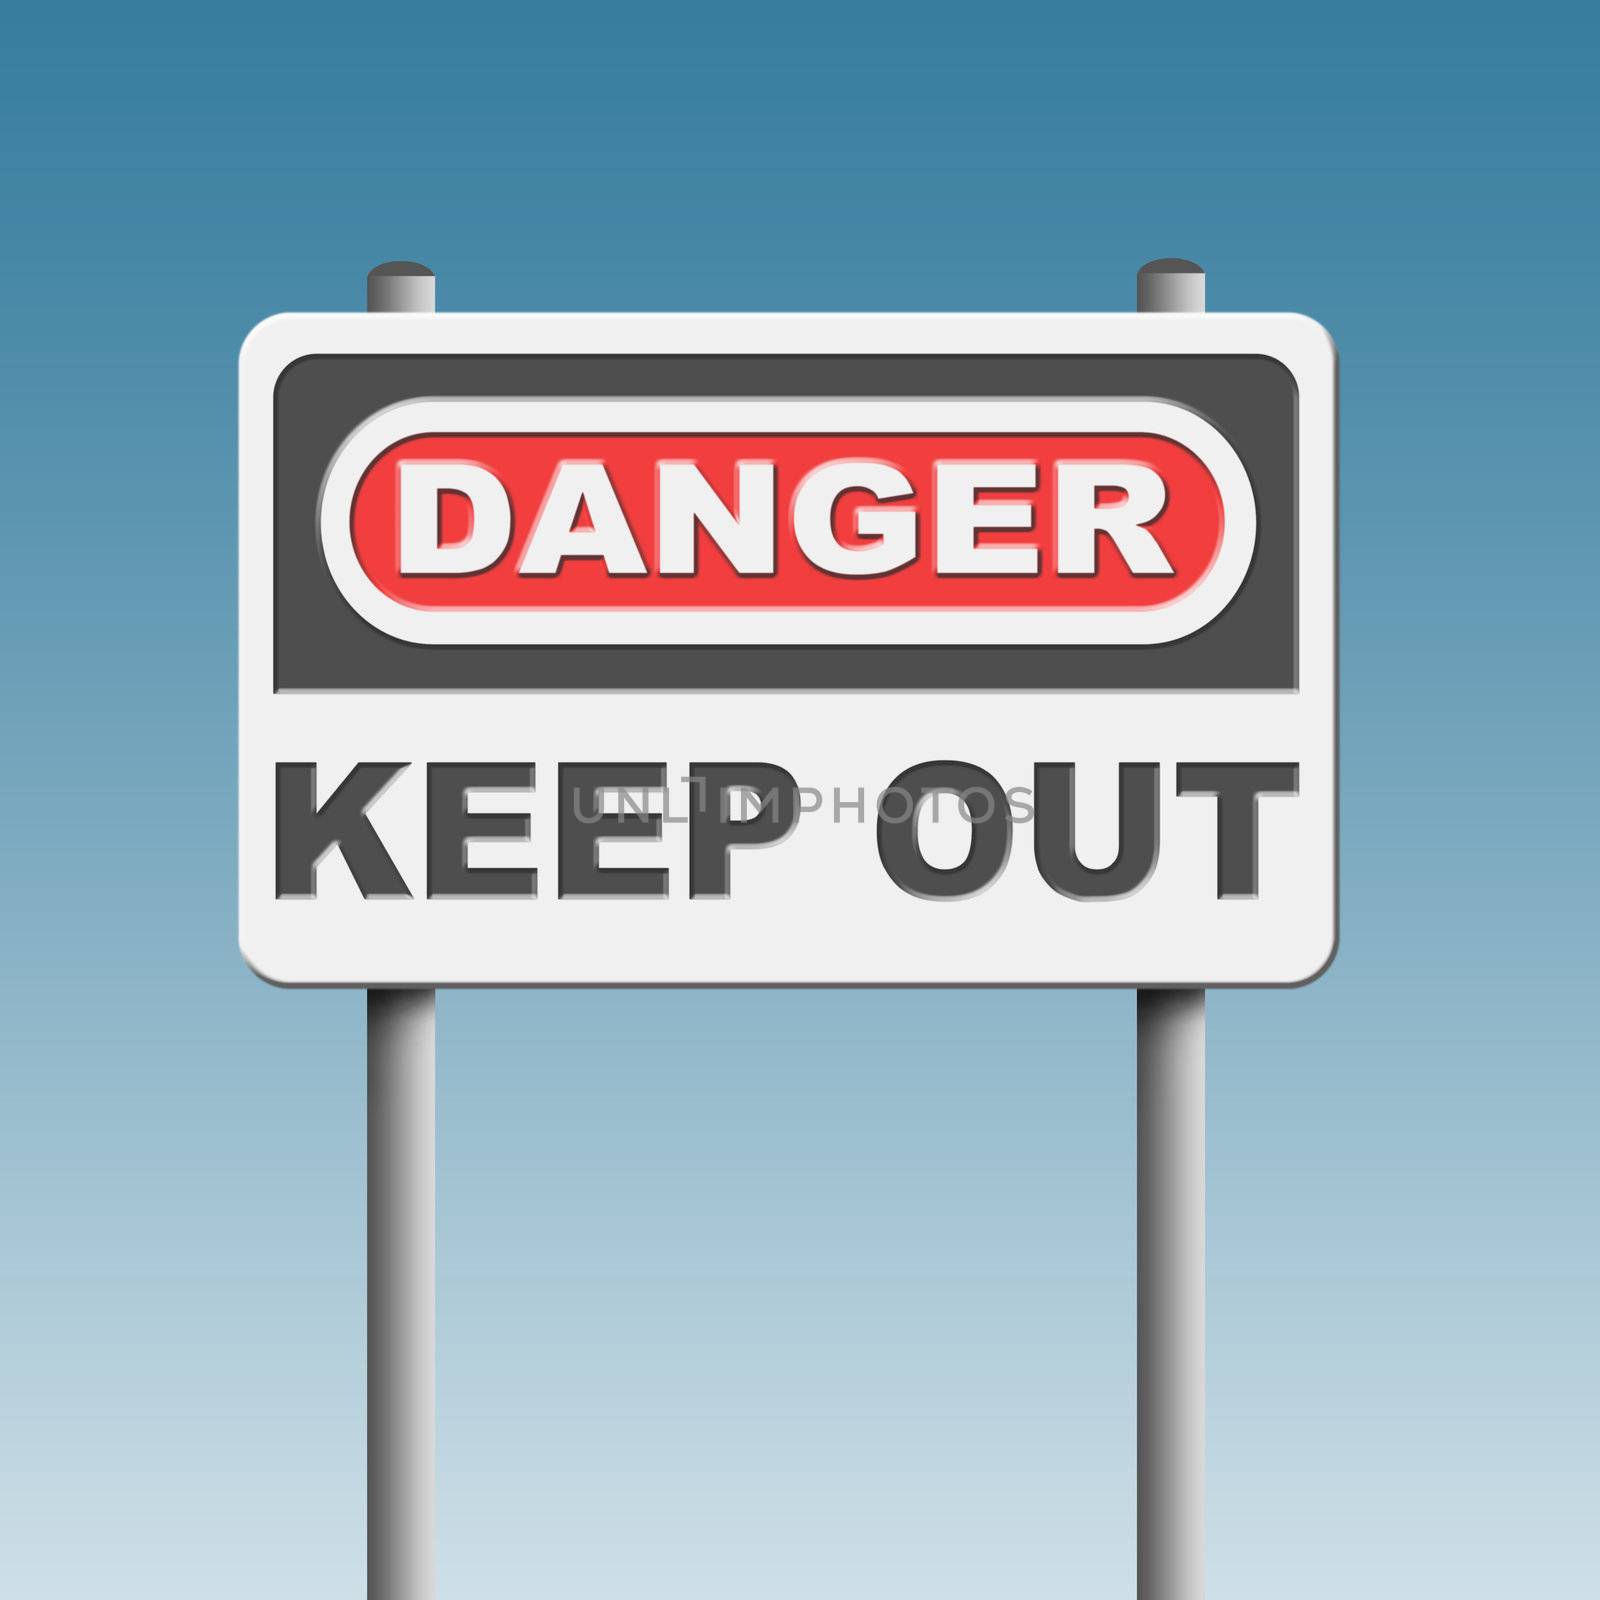 A danger keep out sign